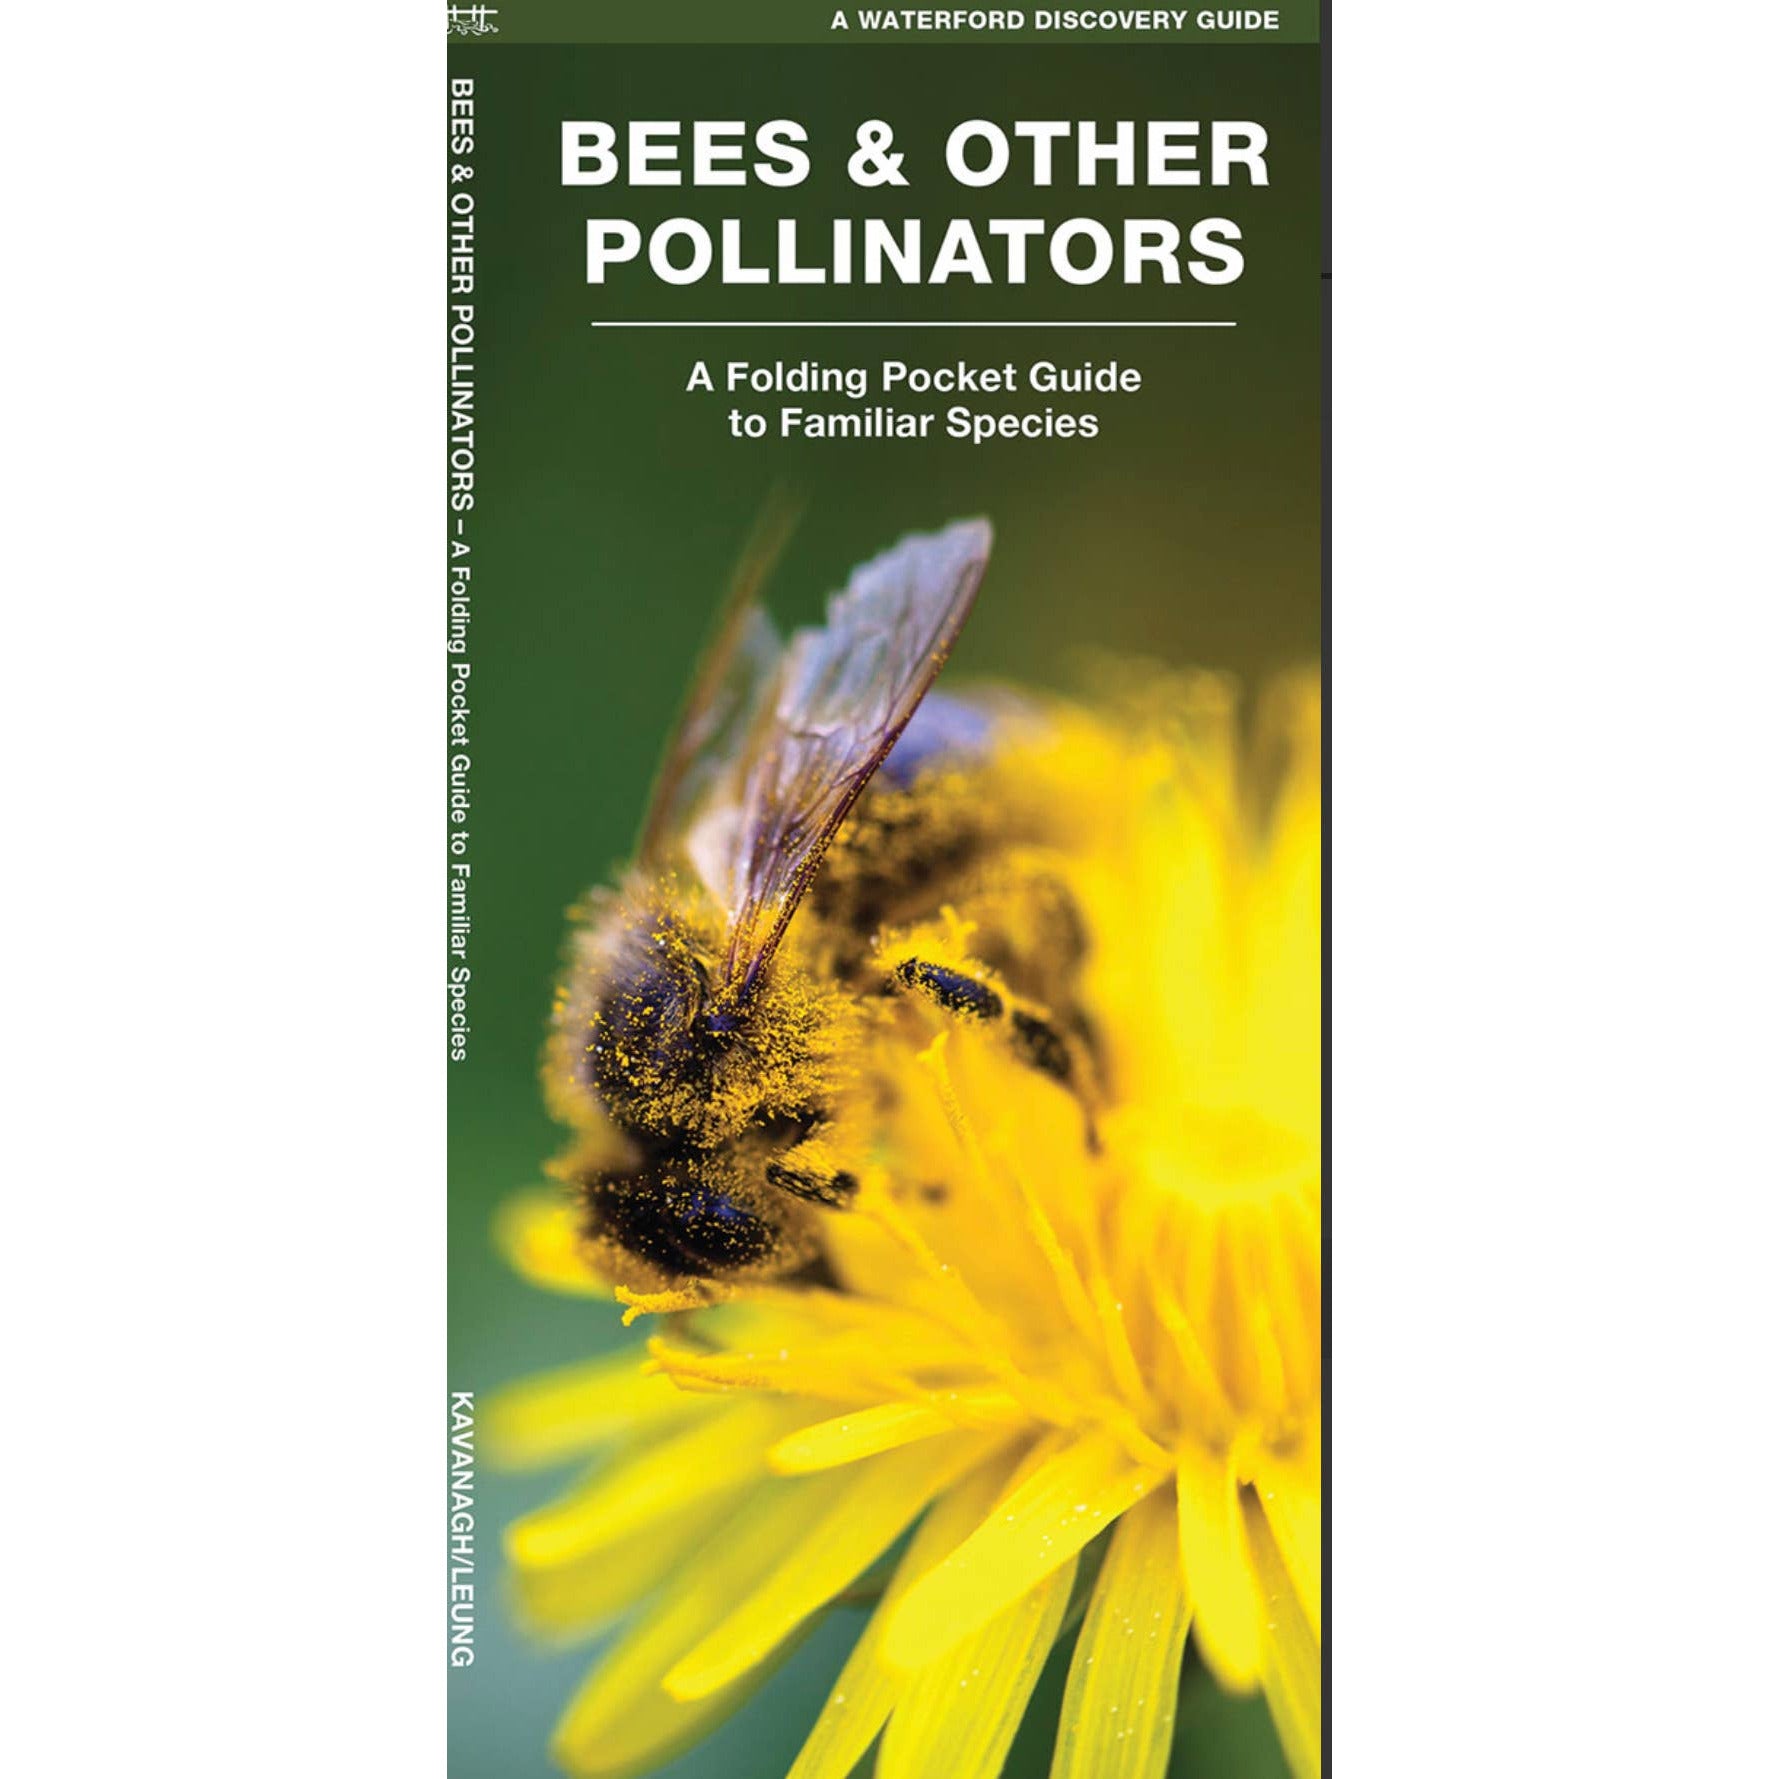 Bees & Other Pollinators Pocket Guide